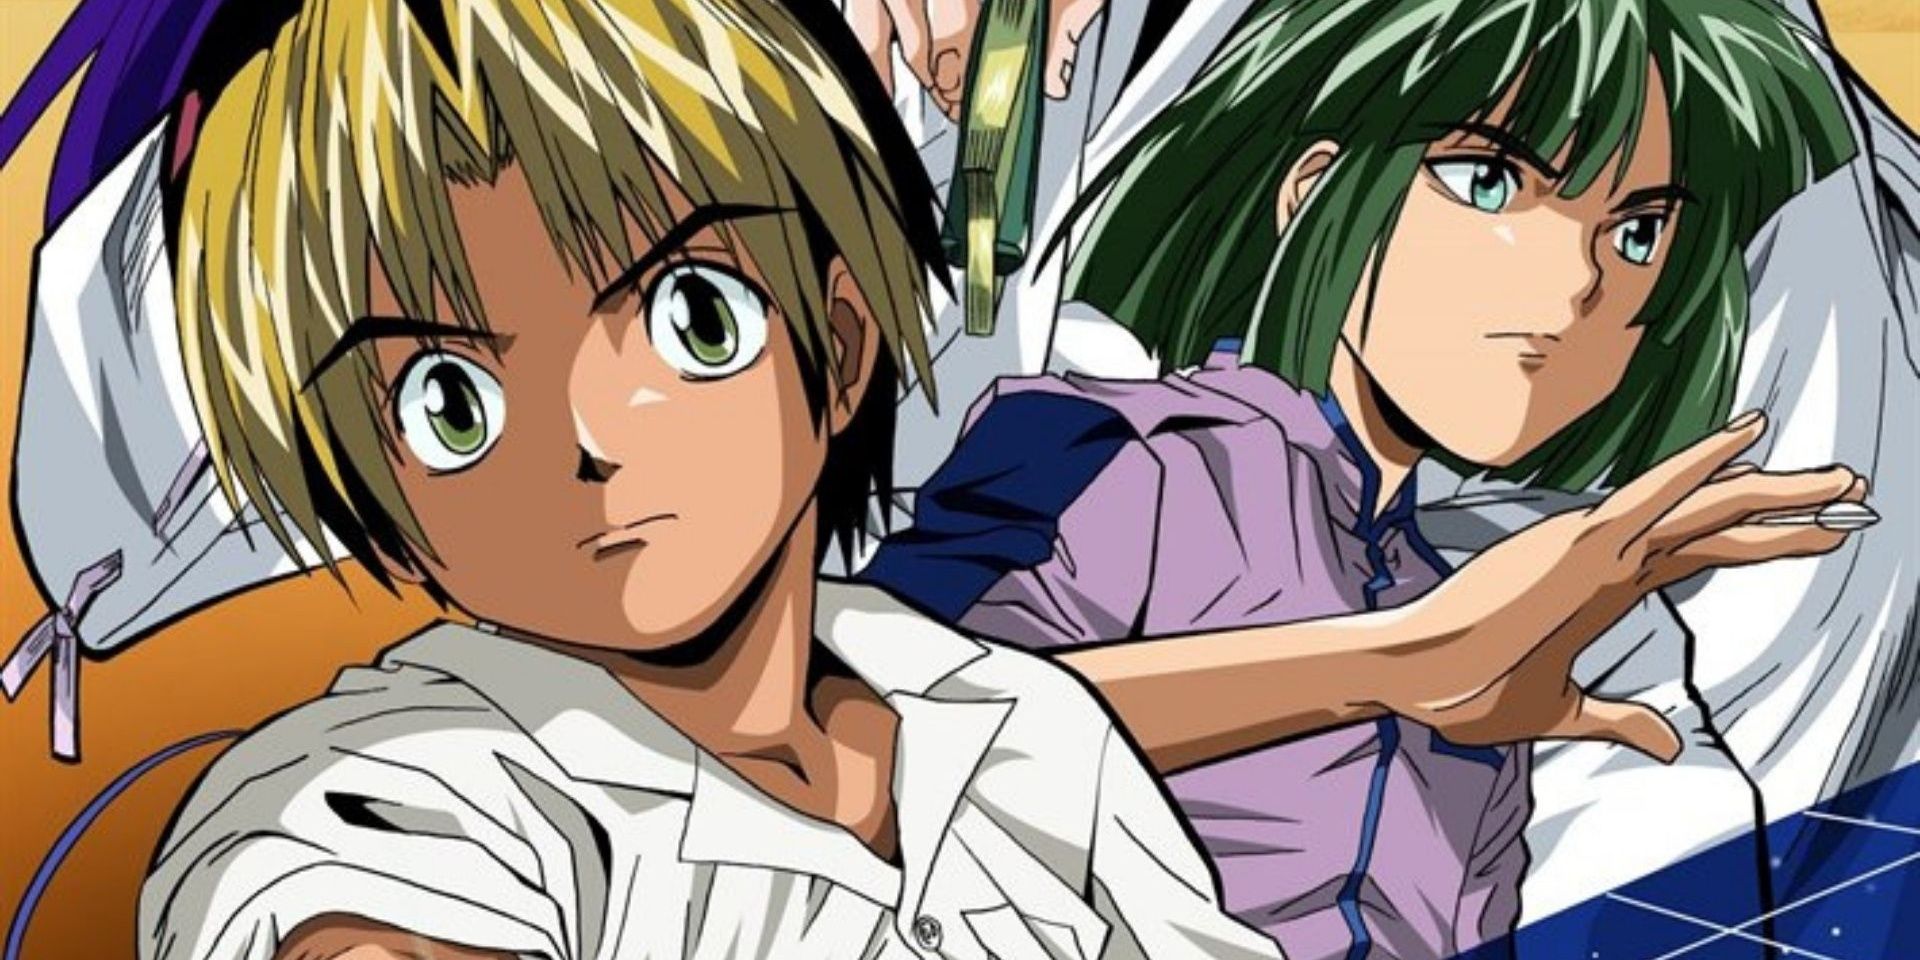 An image from Hikaru no Go, showing the protagonist